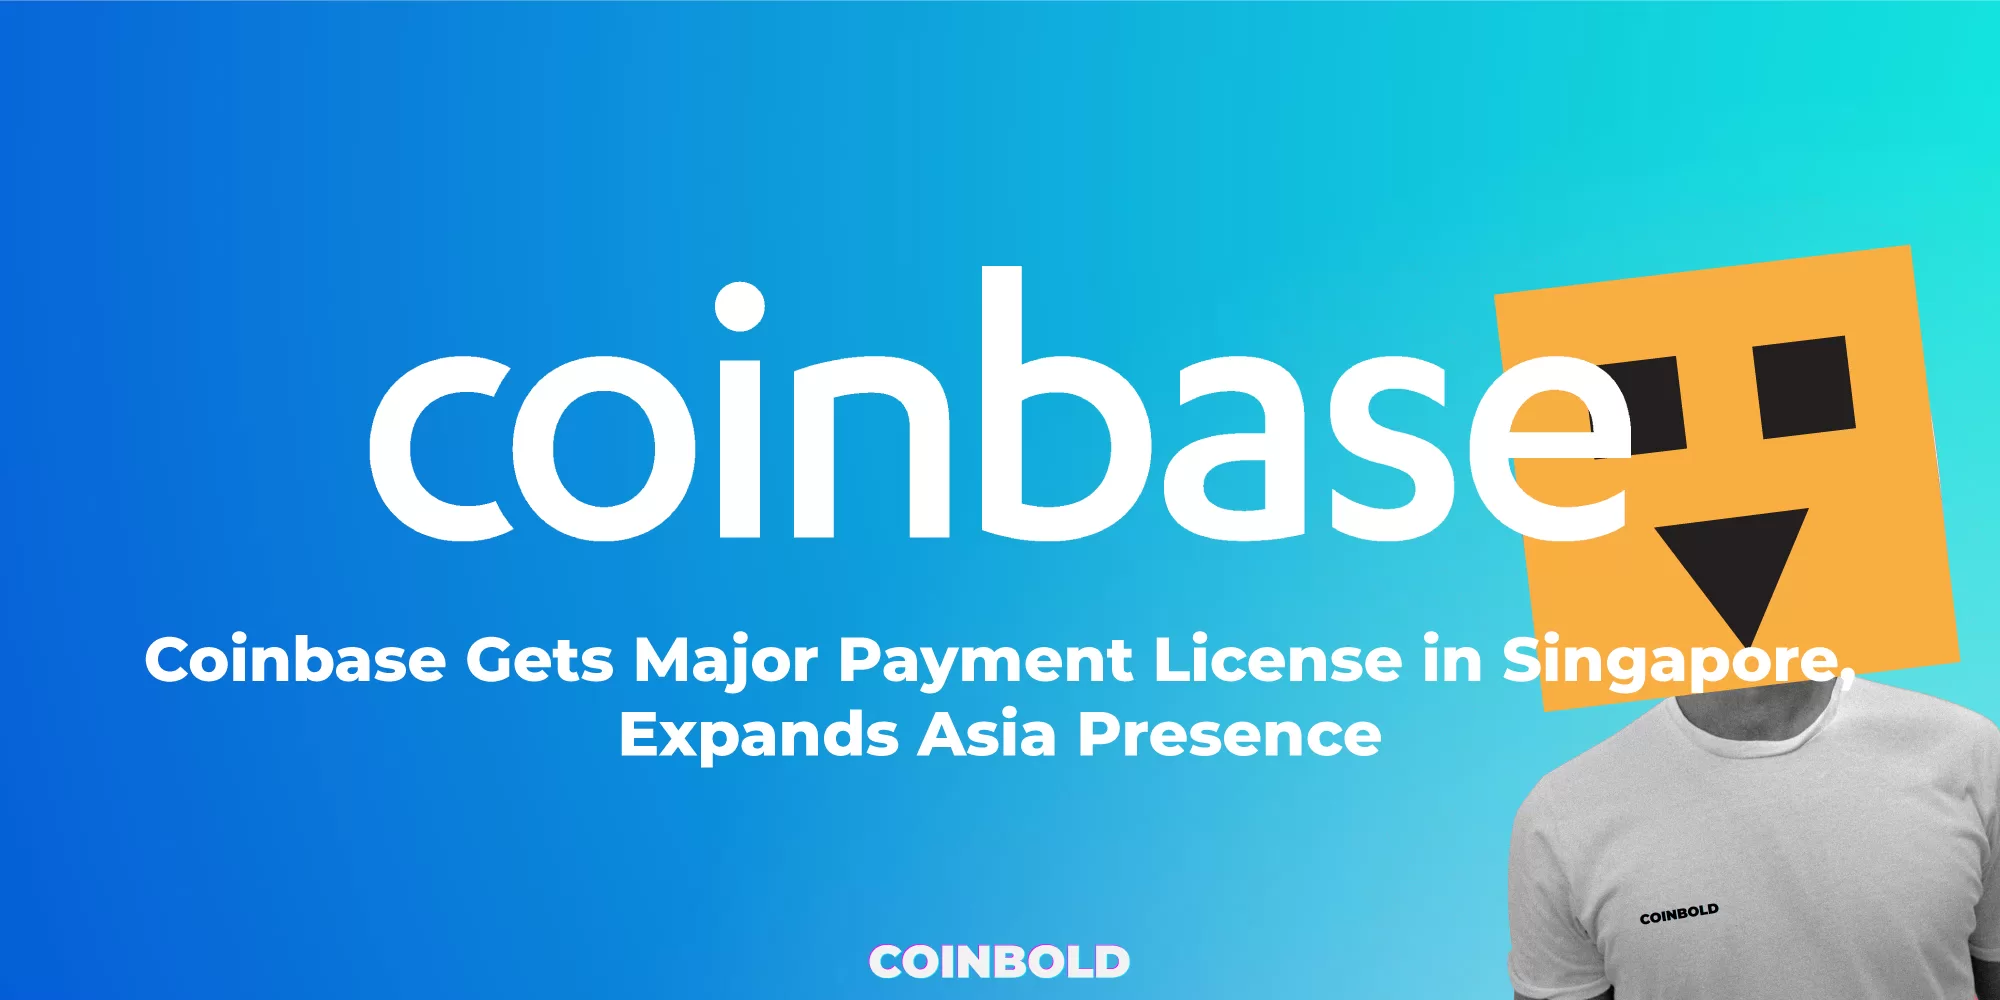 Coinbase Gets Major Payment License in Singapore, Expands Asia Presence